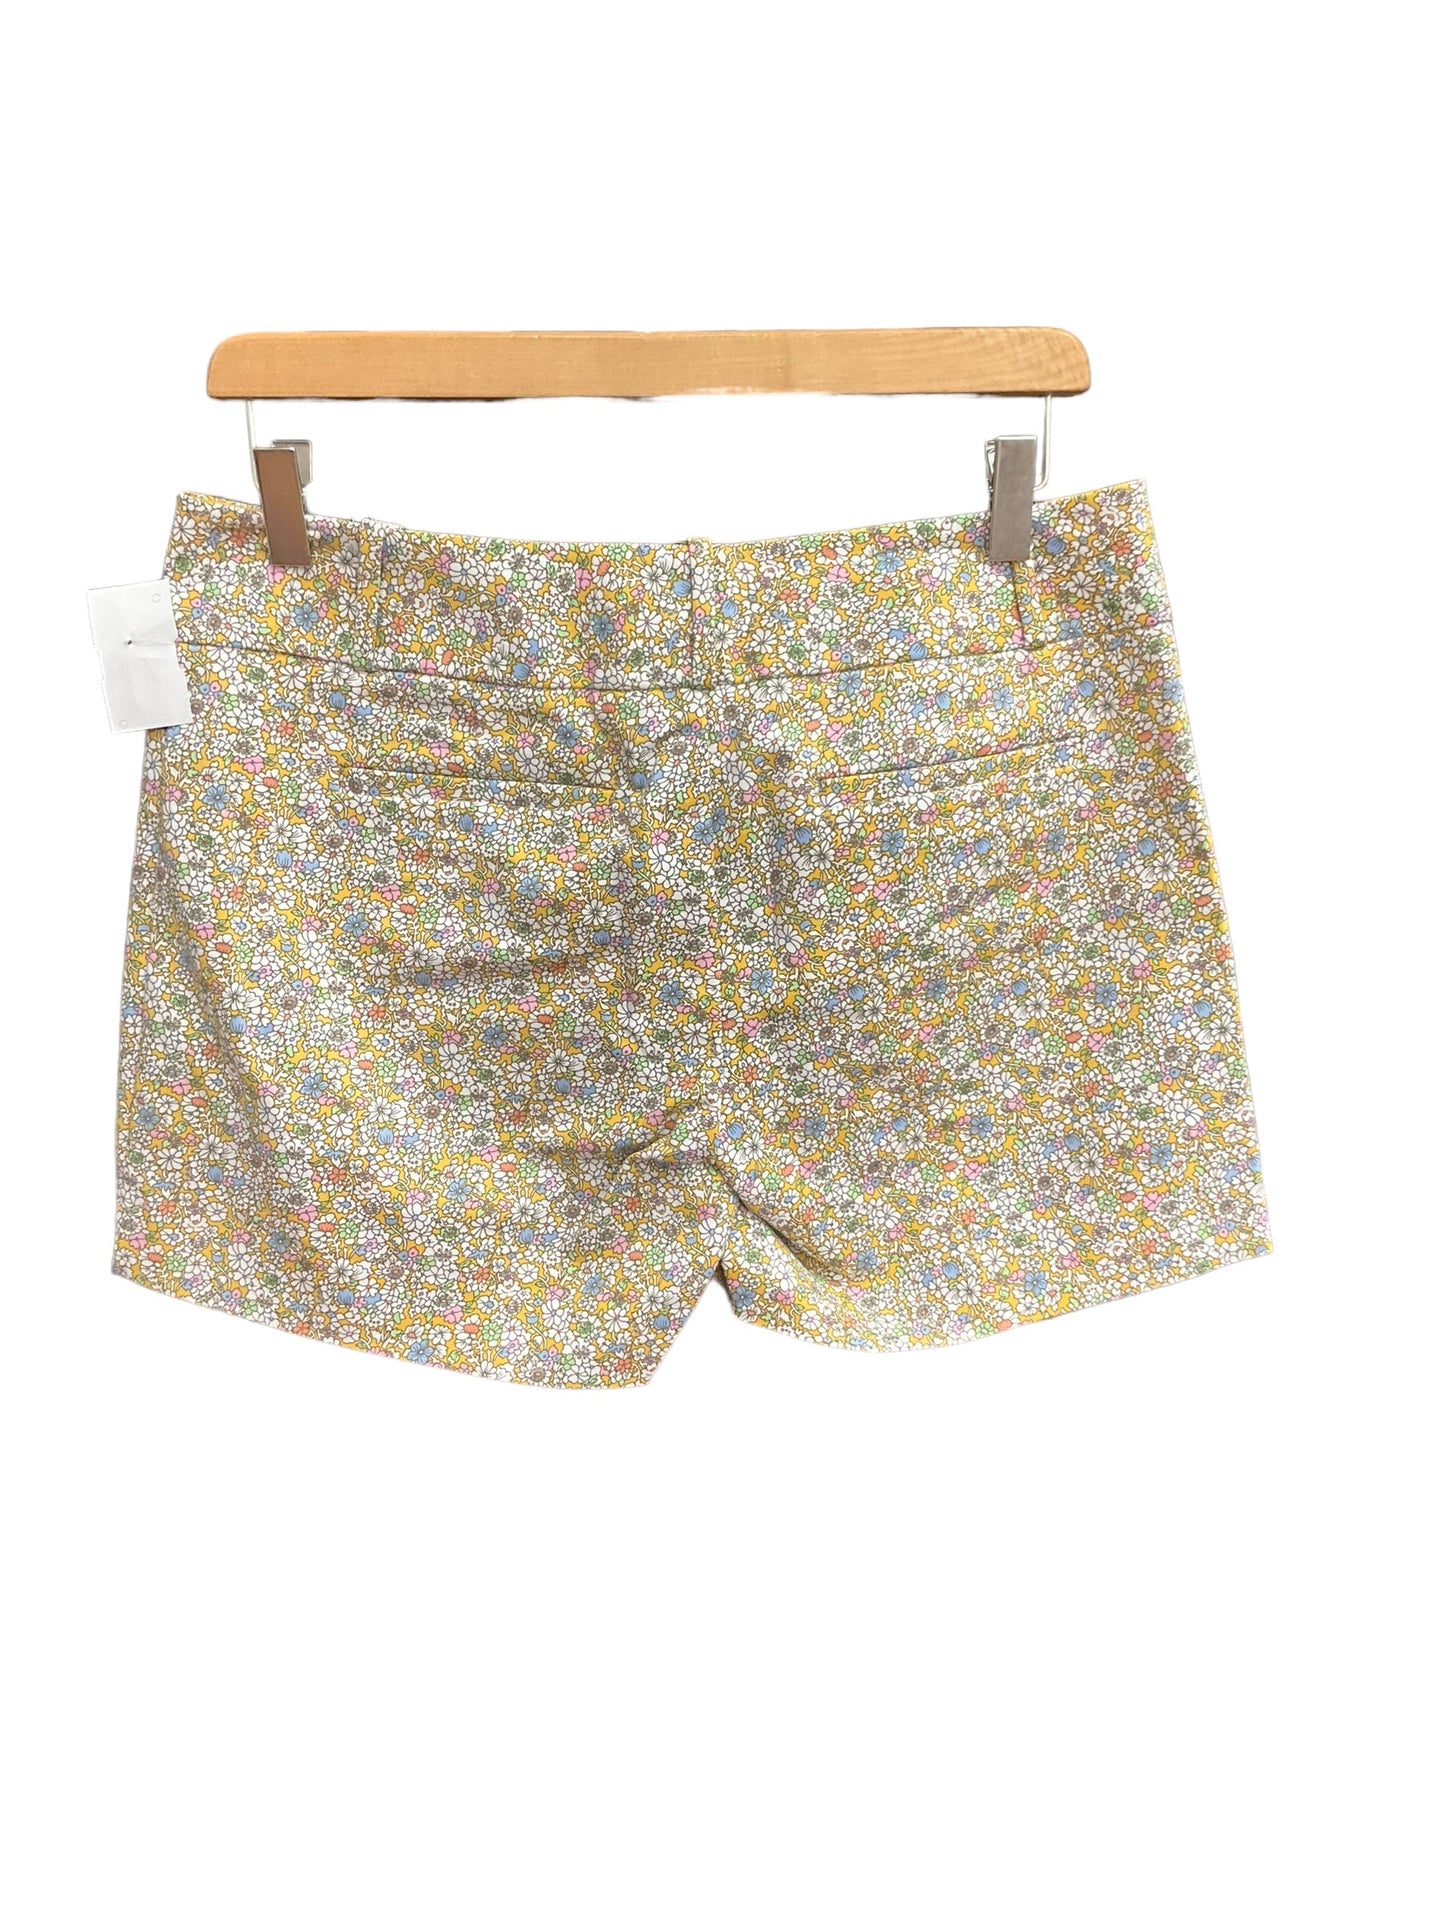 Beige Shorts Limited, Size 6